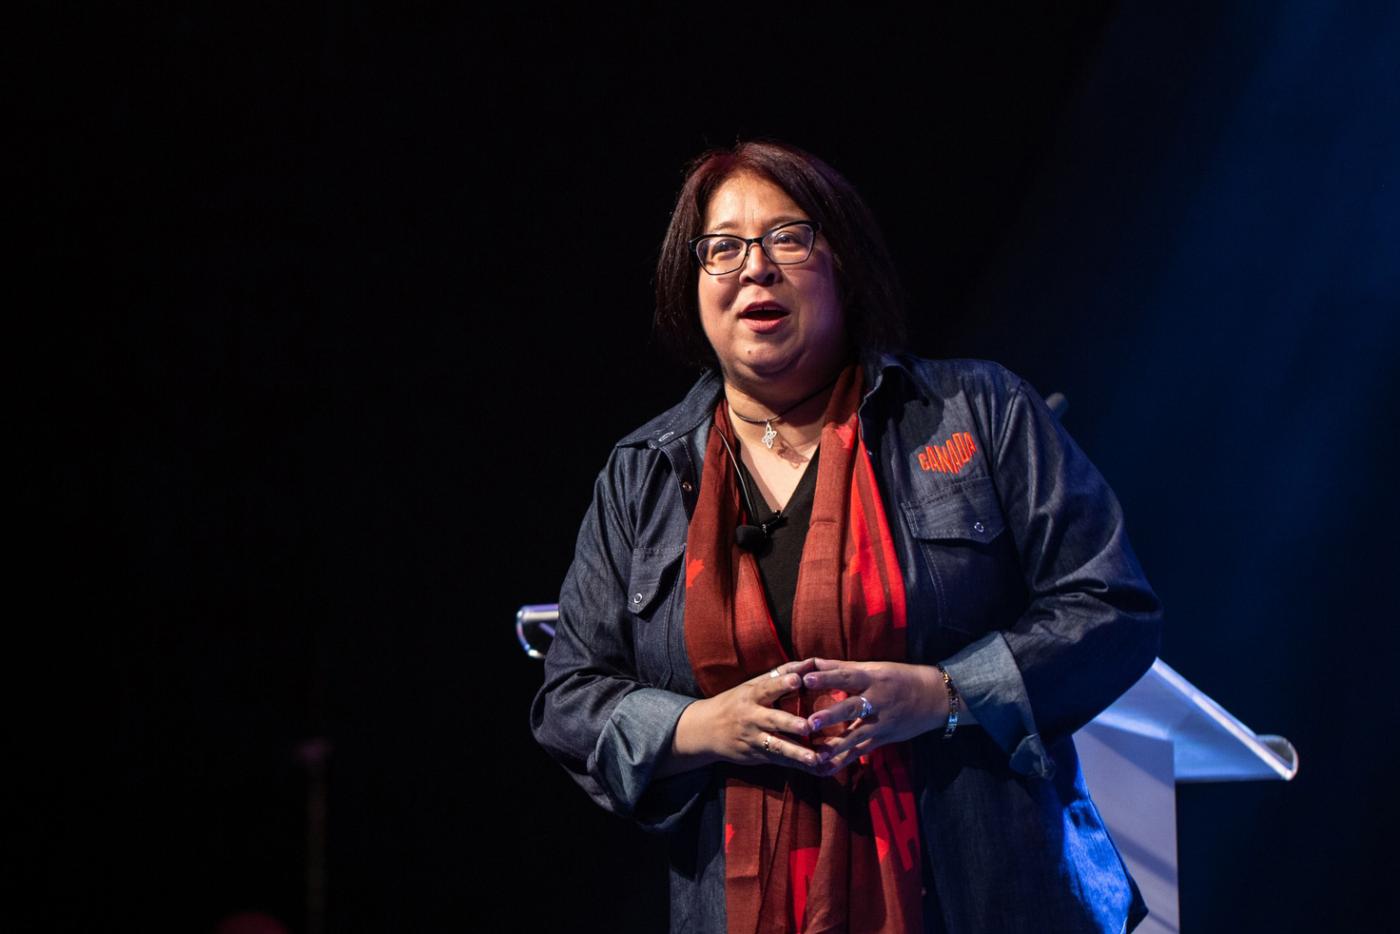 A woman is speaking at an event on stage and wearing a collared denim shirt with the Canada logo embroidered above the left breast pocket, and a red duo-toned Canada branded scarf.